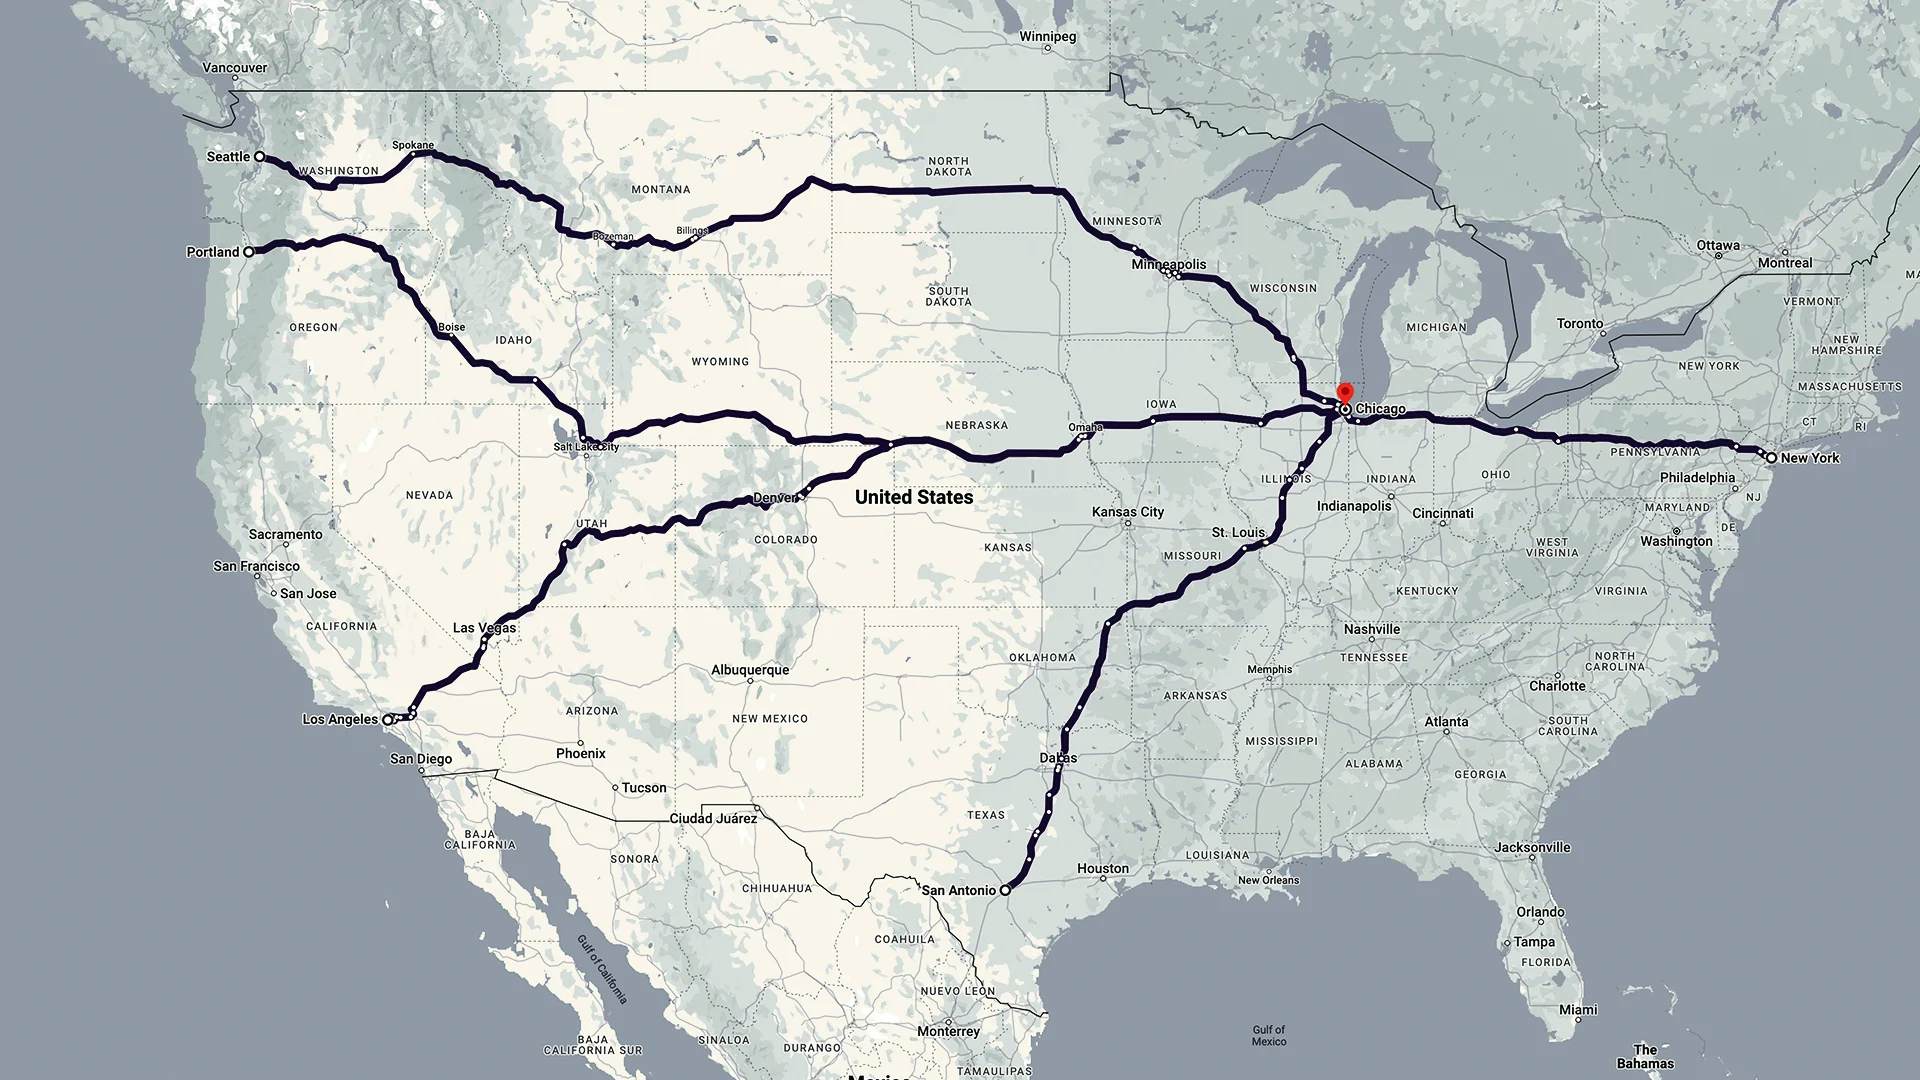 A detailed map of the United States displaying major transportation routes highlighted with a thick black line traversing various states, with a red dot marking Chicago. The map provides a visual representation of significant interstate connections used for logistics and travel across the country.